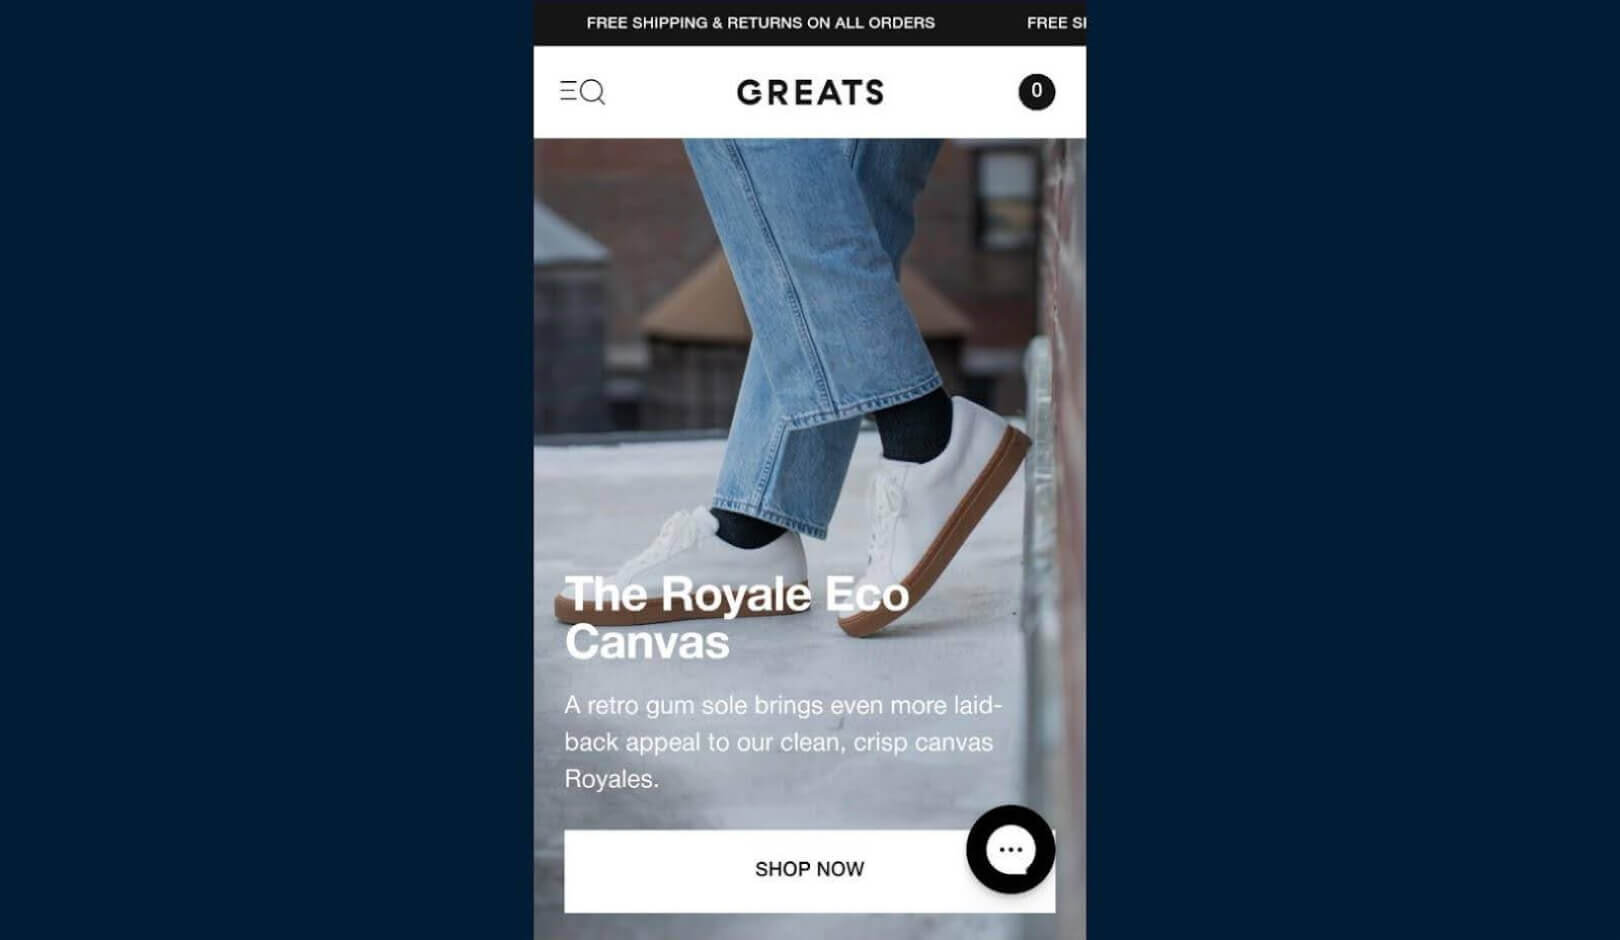 Mobile screen showcasing The Royale Eco Canvas shoes with 'Shop Now' button, highlighting a mobile-first shopping experience as part of the latest ecommerce trends.